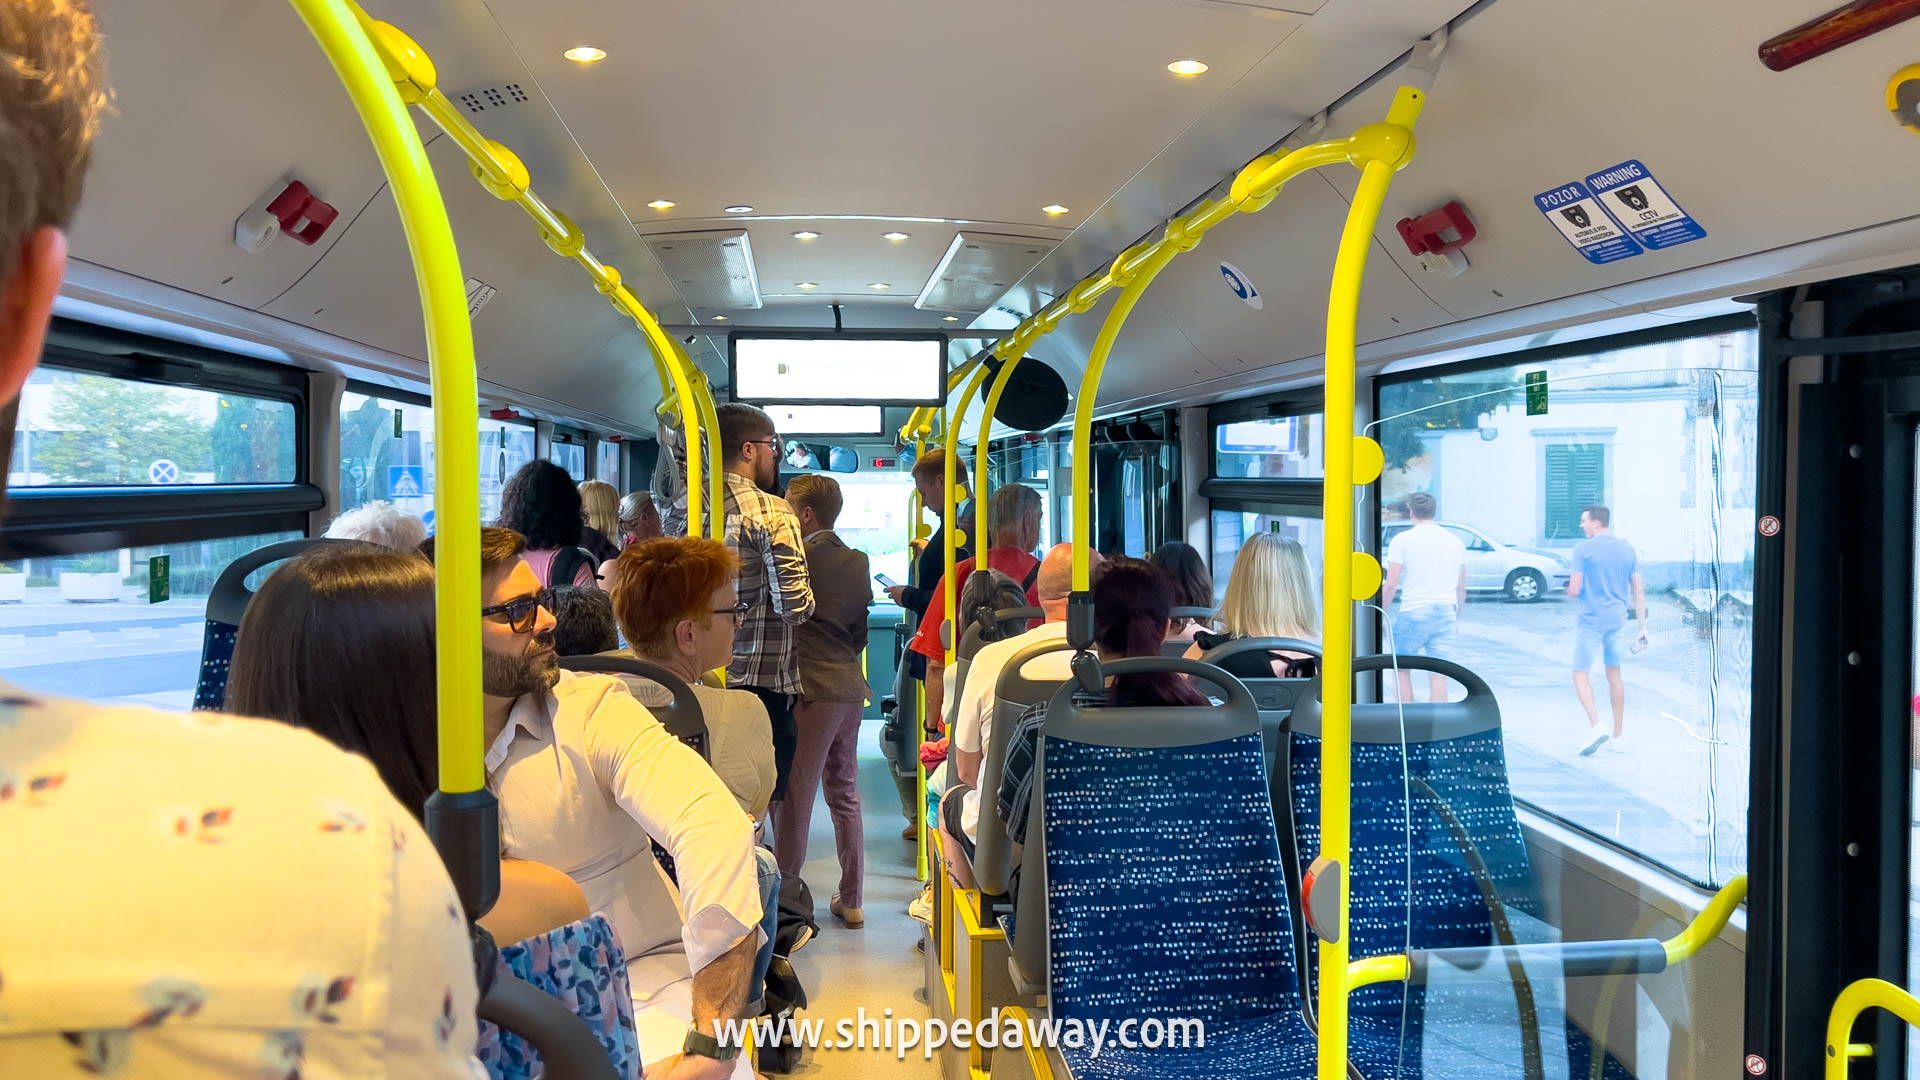 Dubrovnik Pass - Dubrovnik Pass Review - Dubrovnik Card - Is Dubrovnik Pass worth it - free bus with Dubrovnik Pass